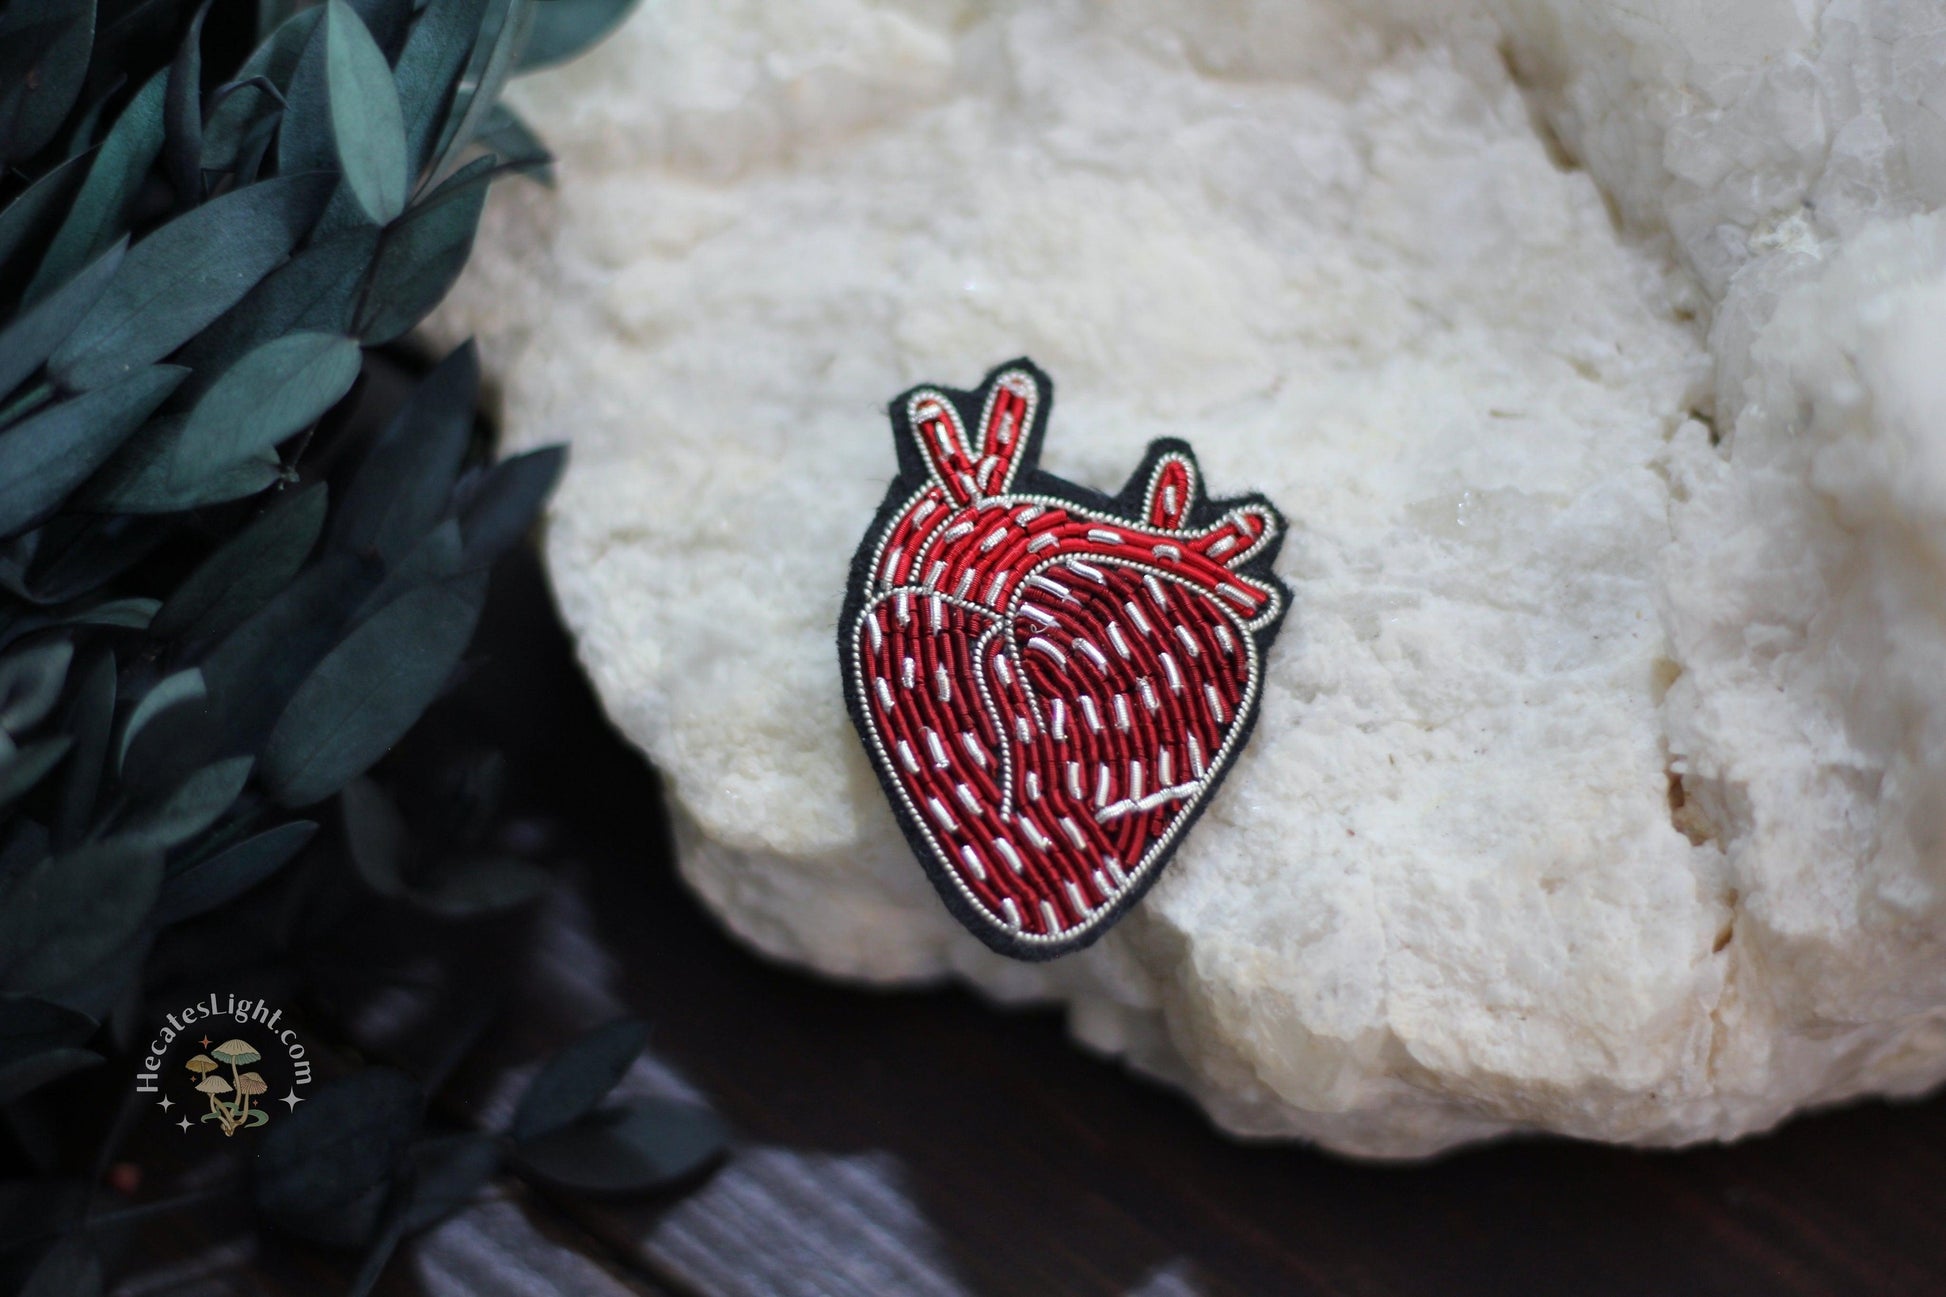 Red Heart Pin MALICIEUSE birthday brocade, brooch, canada, cloth, decorative, embroidered, embroidery, gift, heart, pin, red, clothing, witchy gift Red Heart Pin MALICIEUSE birthday brocade, brooch, calgary, canada, cloth, decorative, embroidered, embroidery, gift, heart, pin, red, clothing, witchy gift metaphysical occult supplies witchy hecateslight.com witchcraft cottagecore witch gifts metaphysical occult supplies witchy hecateslight.com witchcraft cottagecore witch gifts